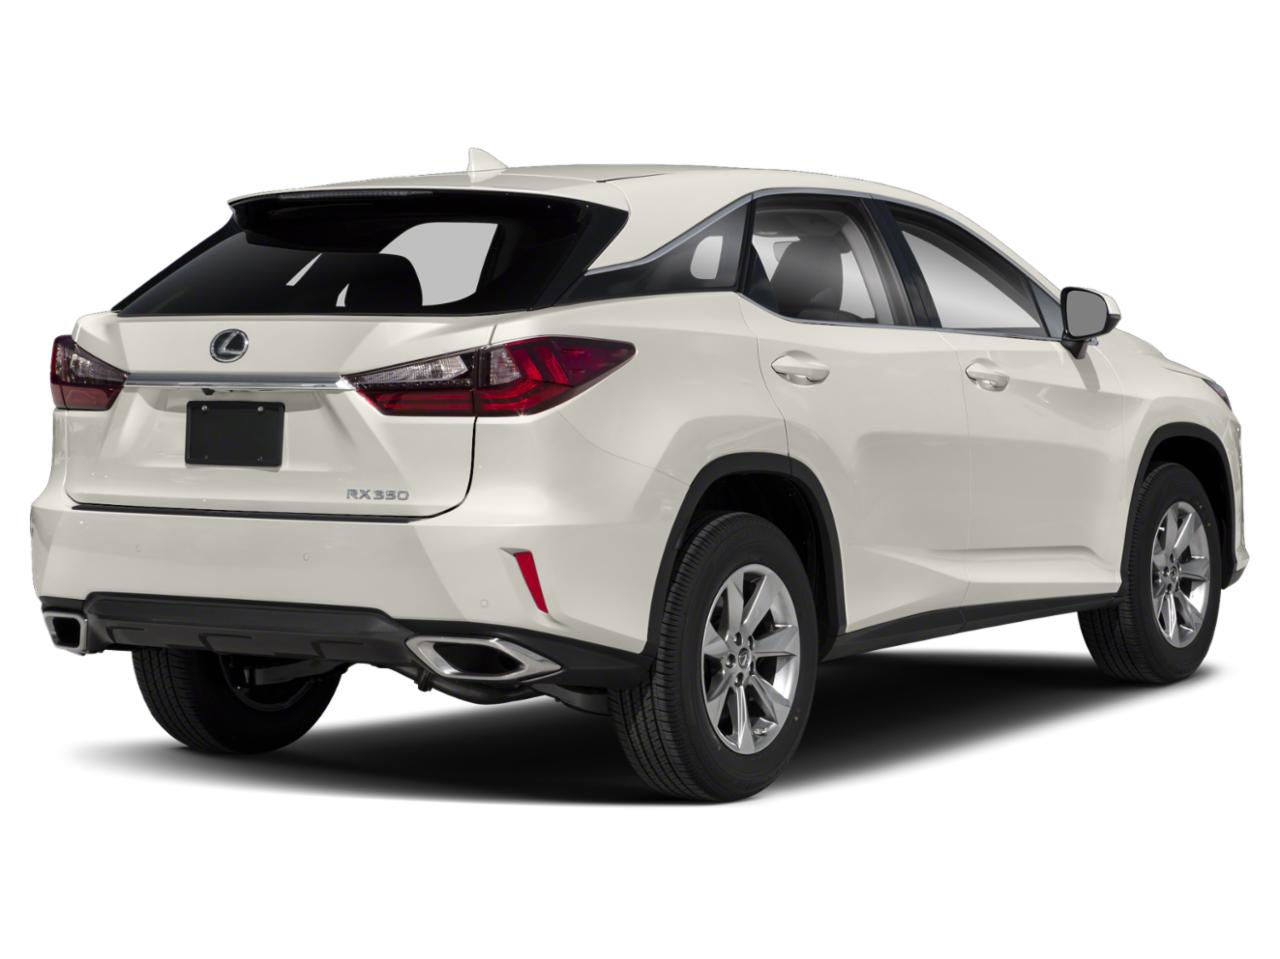 New 2019 Lexus RX 350 Nebula Gray Pearl AWD For Sale in